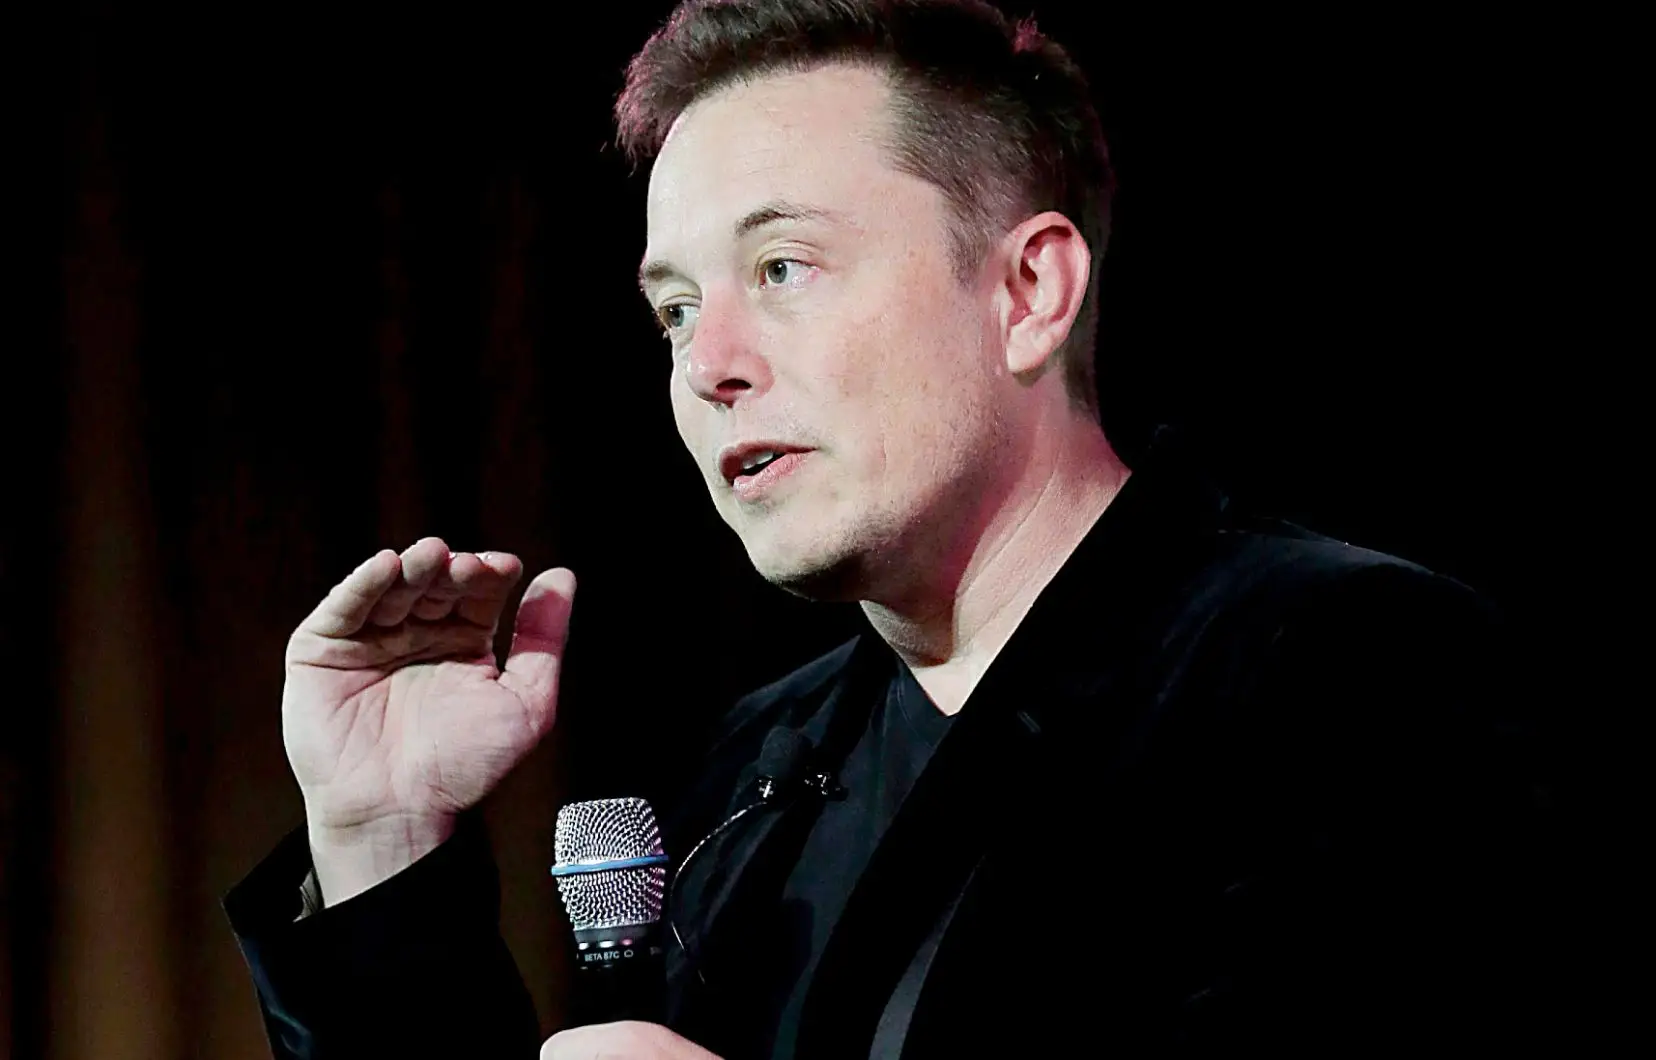 At a TED conference, Elon Musk assured that Twitter would respect the various national laws that govern freedom of expression around the world.